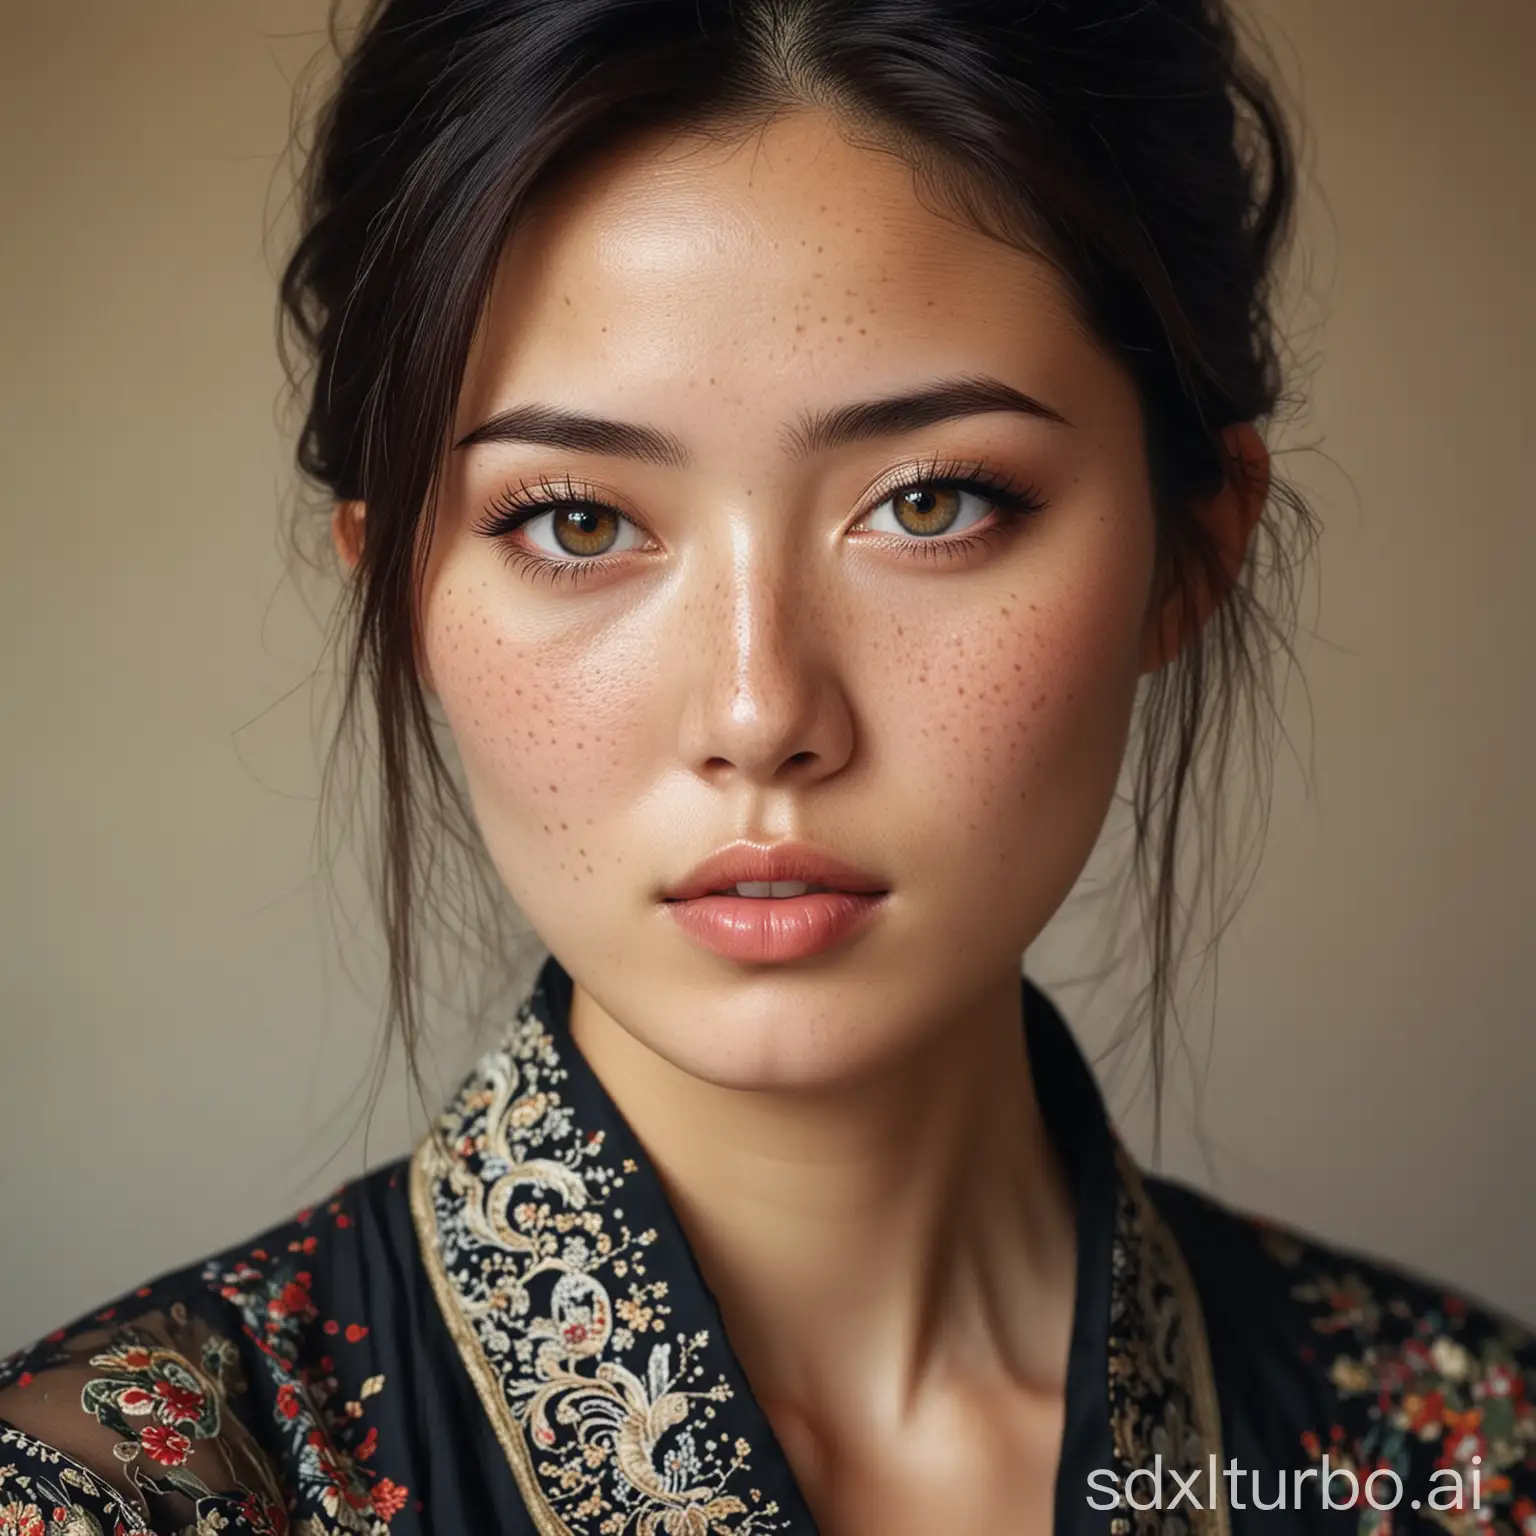 Beautiful oriental woman, with freckles on her face, good figure, cultured, refined, and fashionable attire.